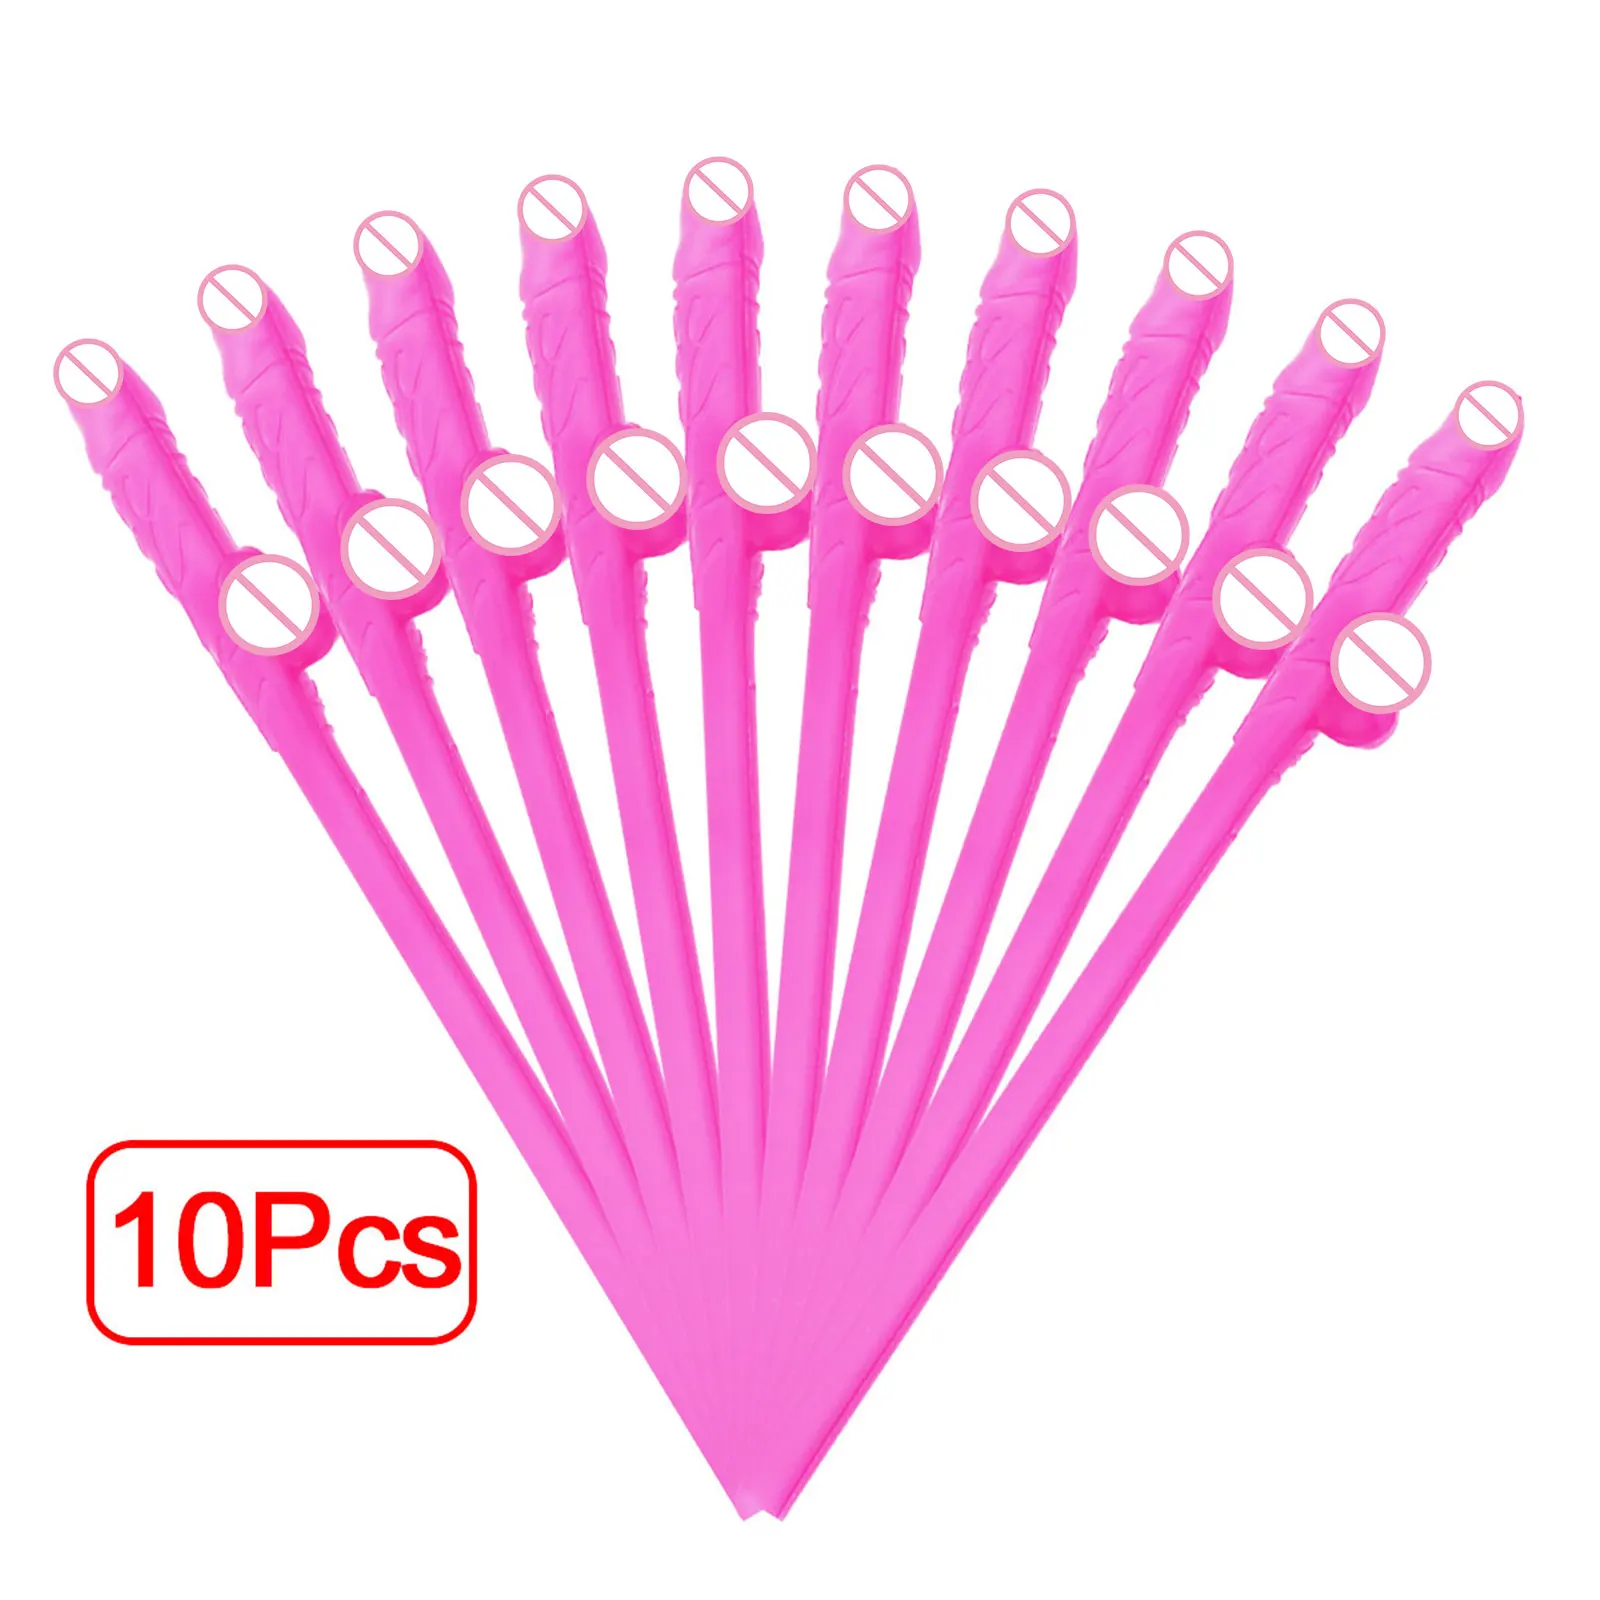 Willy Straws Dickie Straws Drinking Straws 1 x pack of 10 or 3 x packs of 10 